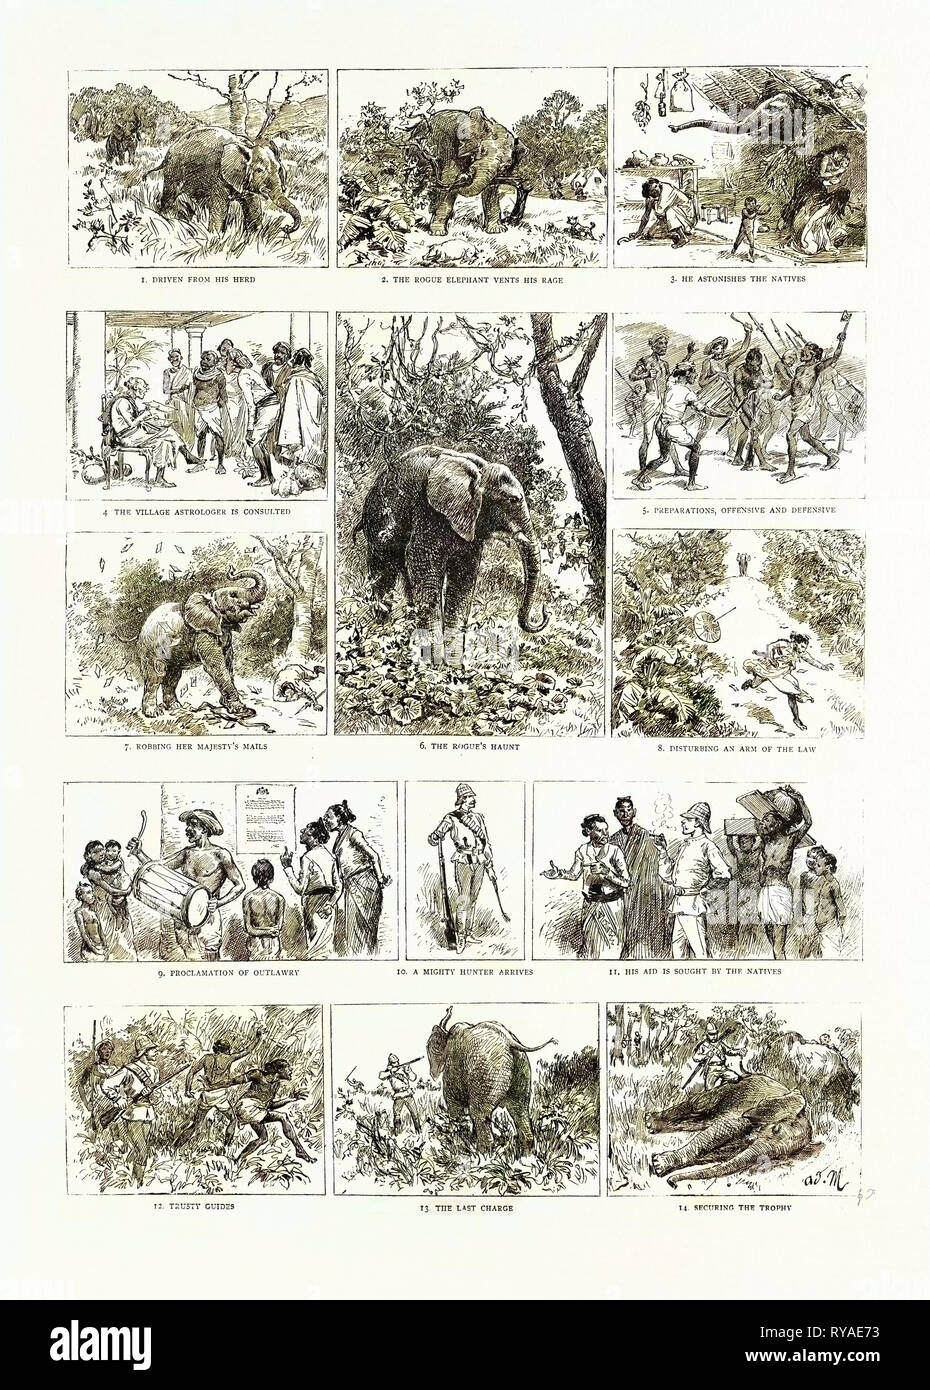 The Frolics of a Ceylon 'Rogue' Elephant and Their Consequences Stock Photo